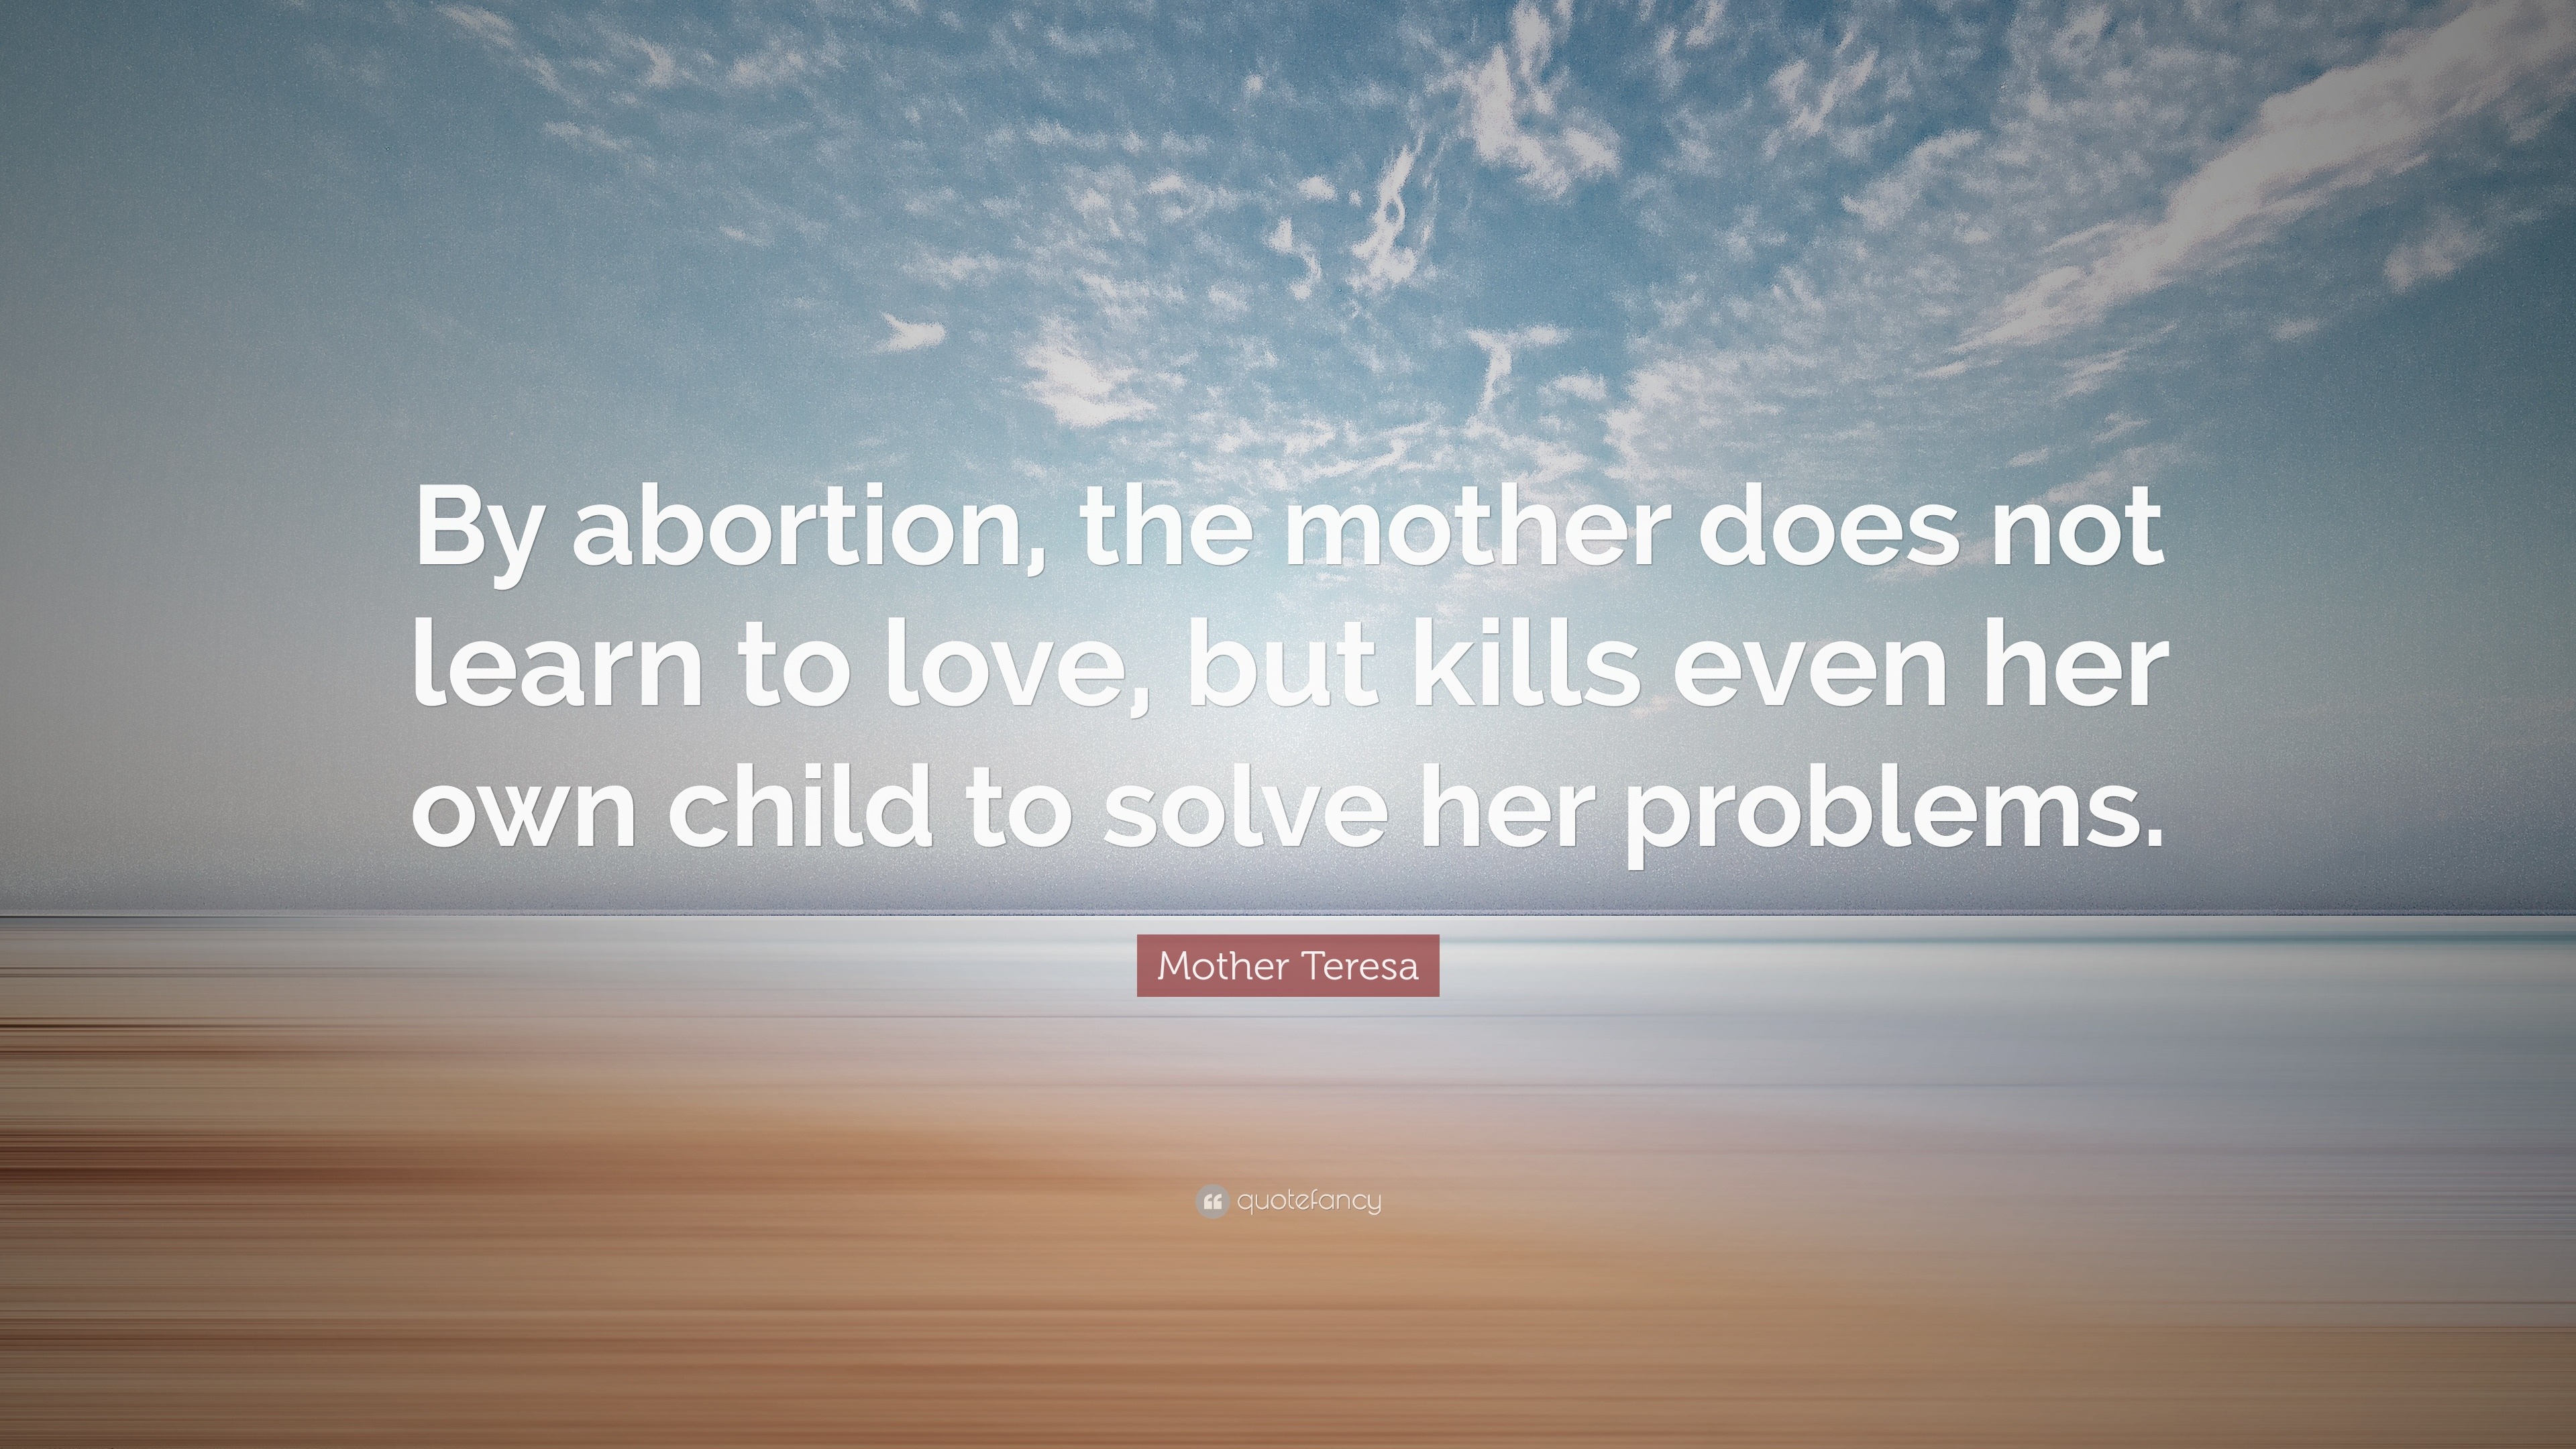 Mother Teresa Quote “By the mother does not learn to love